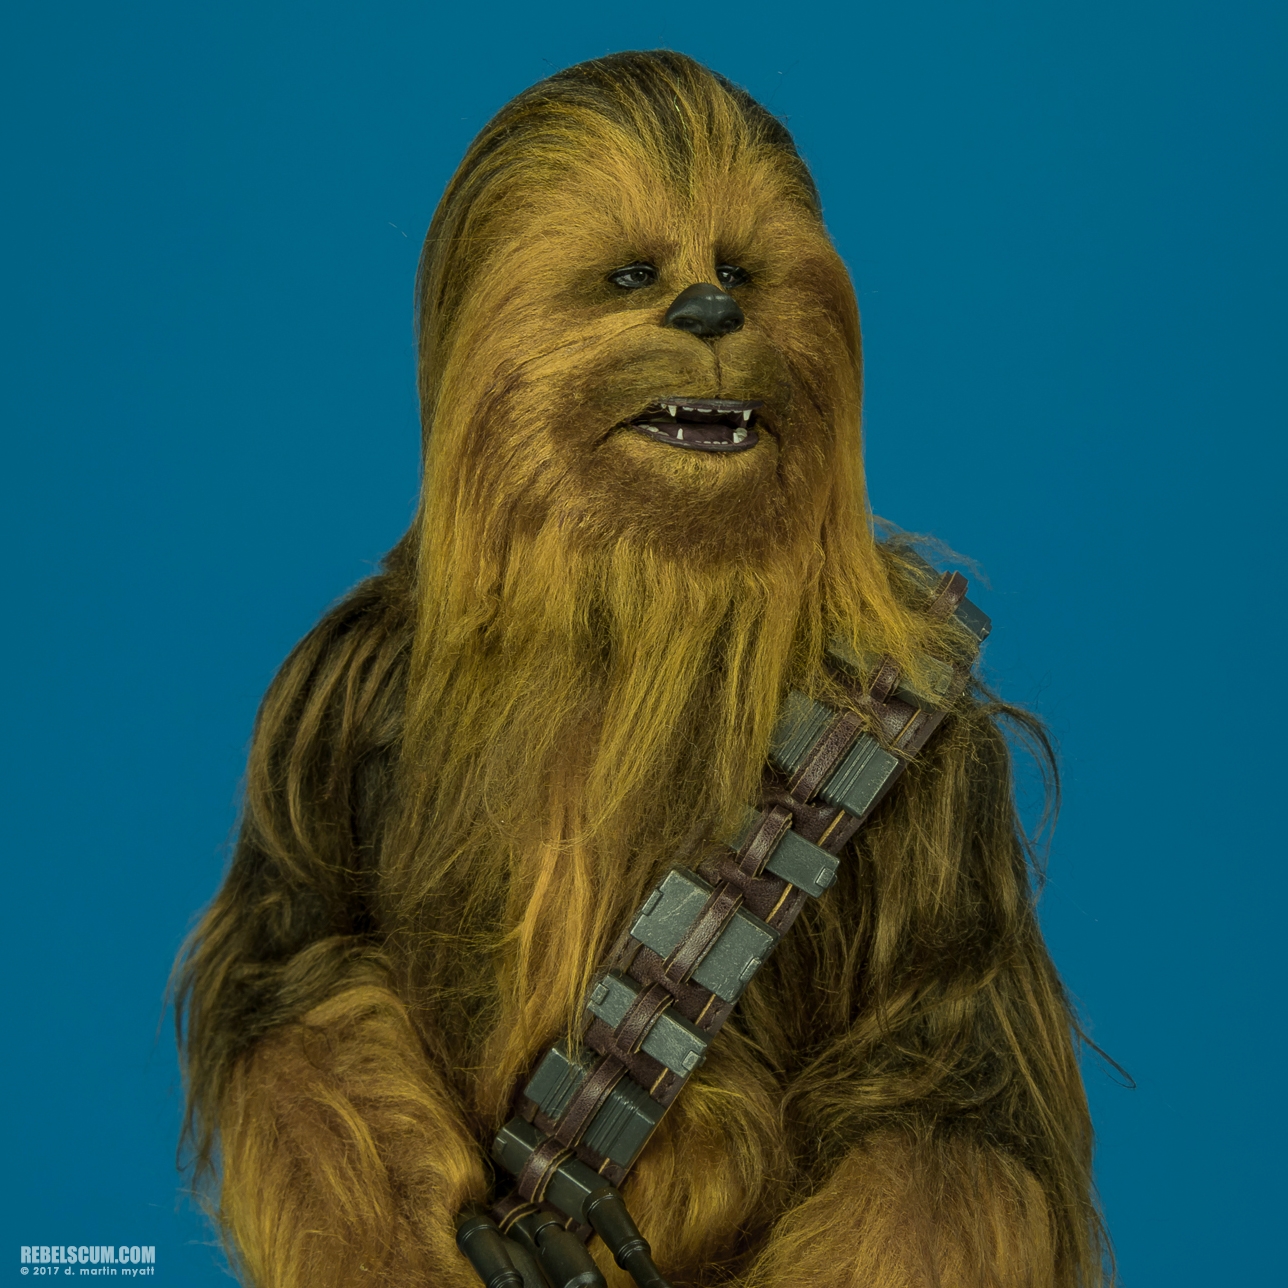 MMS376-Han-Solo-Chewbacca-The-Force-Awakens-Hot-Toys-022.jpg